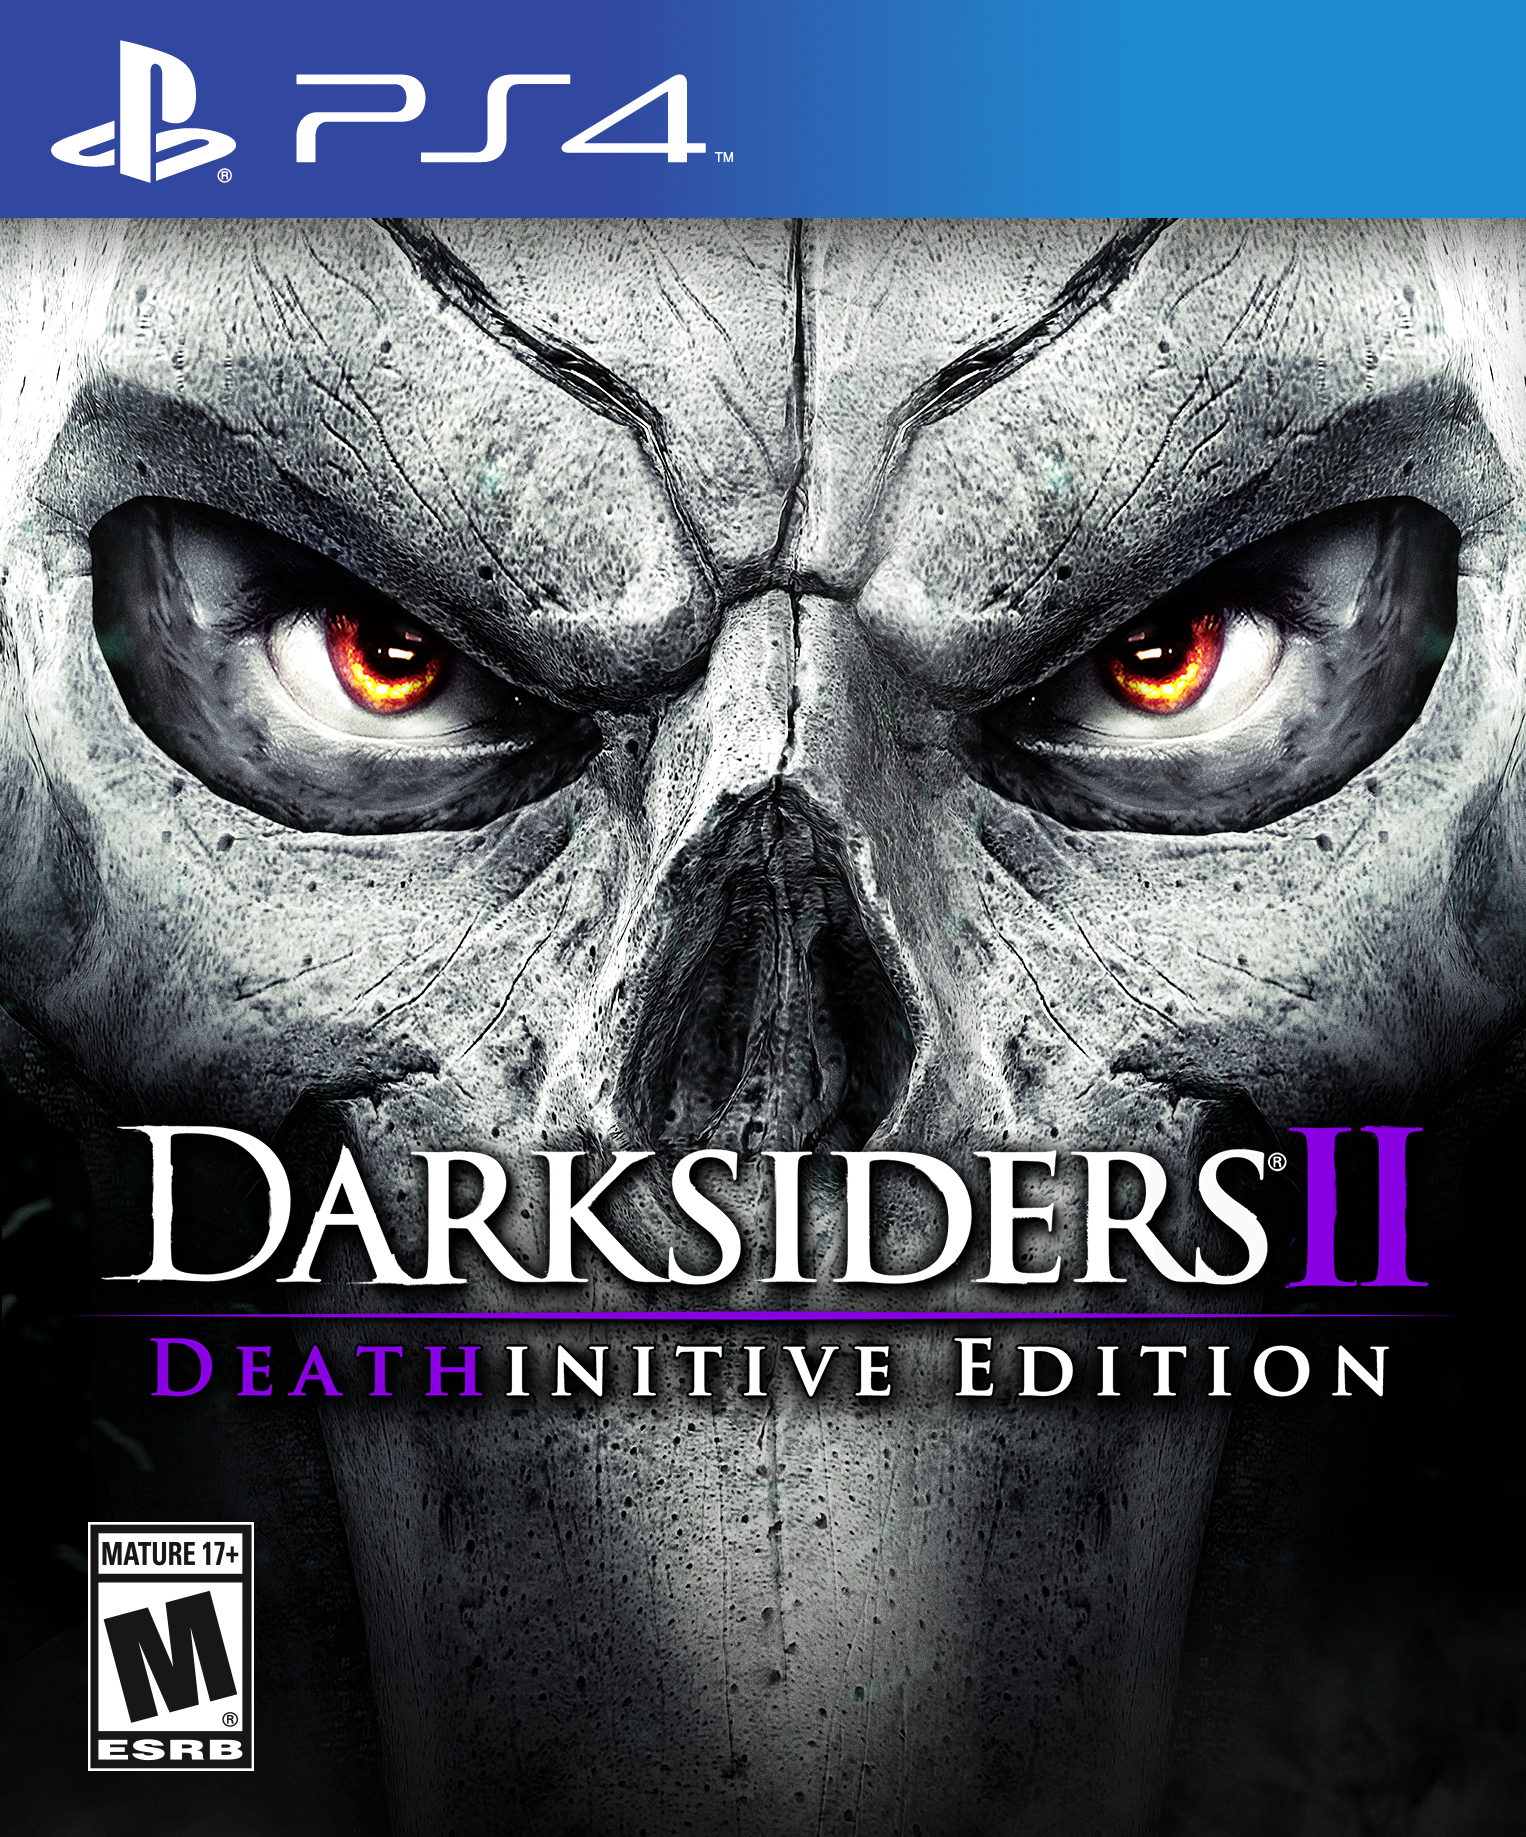 Image for Darksiders 2: Deathinitive Edition out later this month on PS4, Xbox One